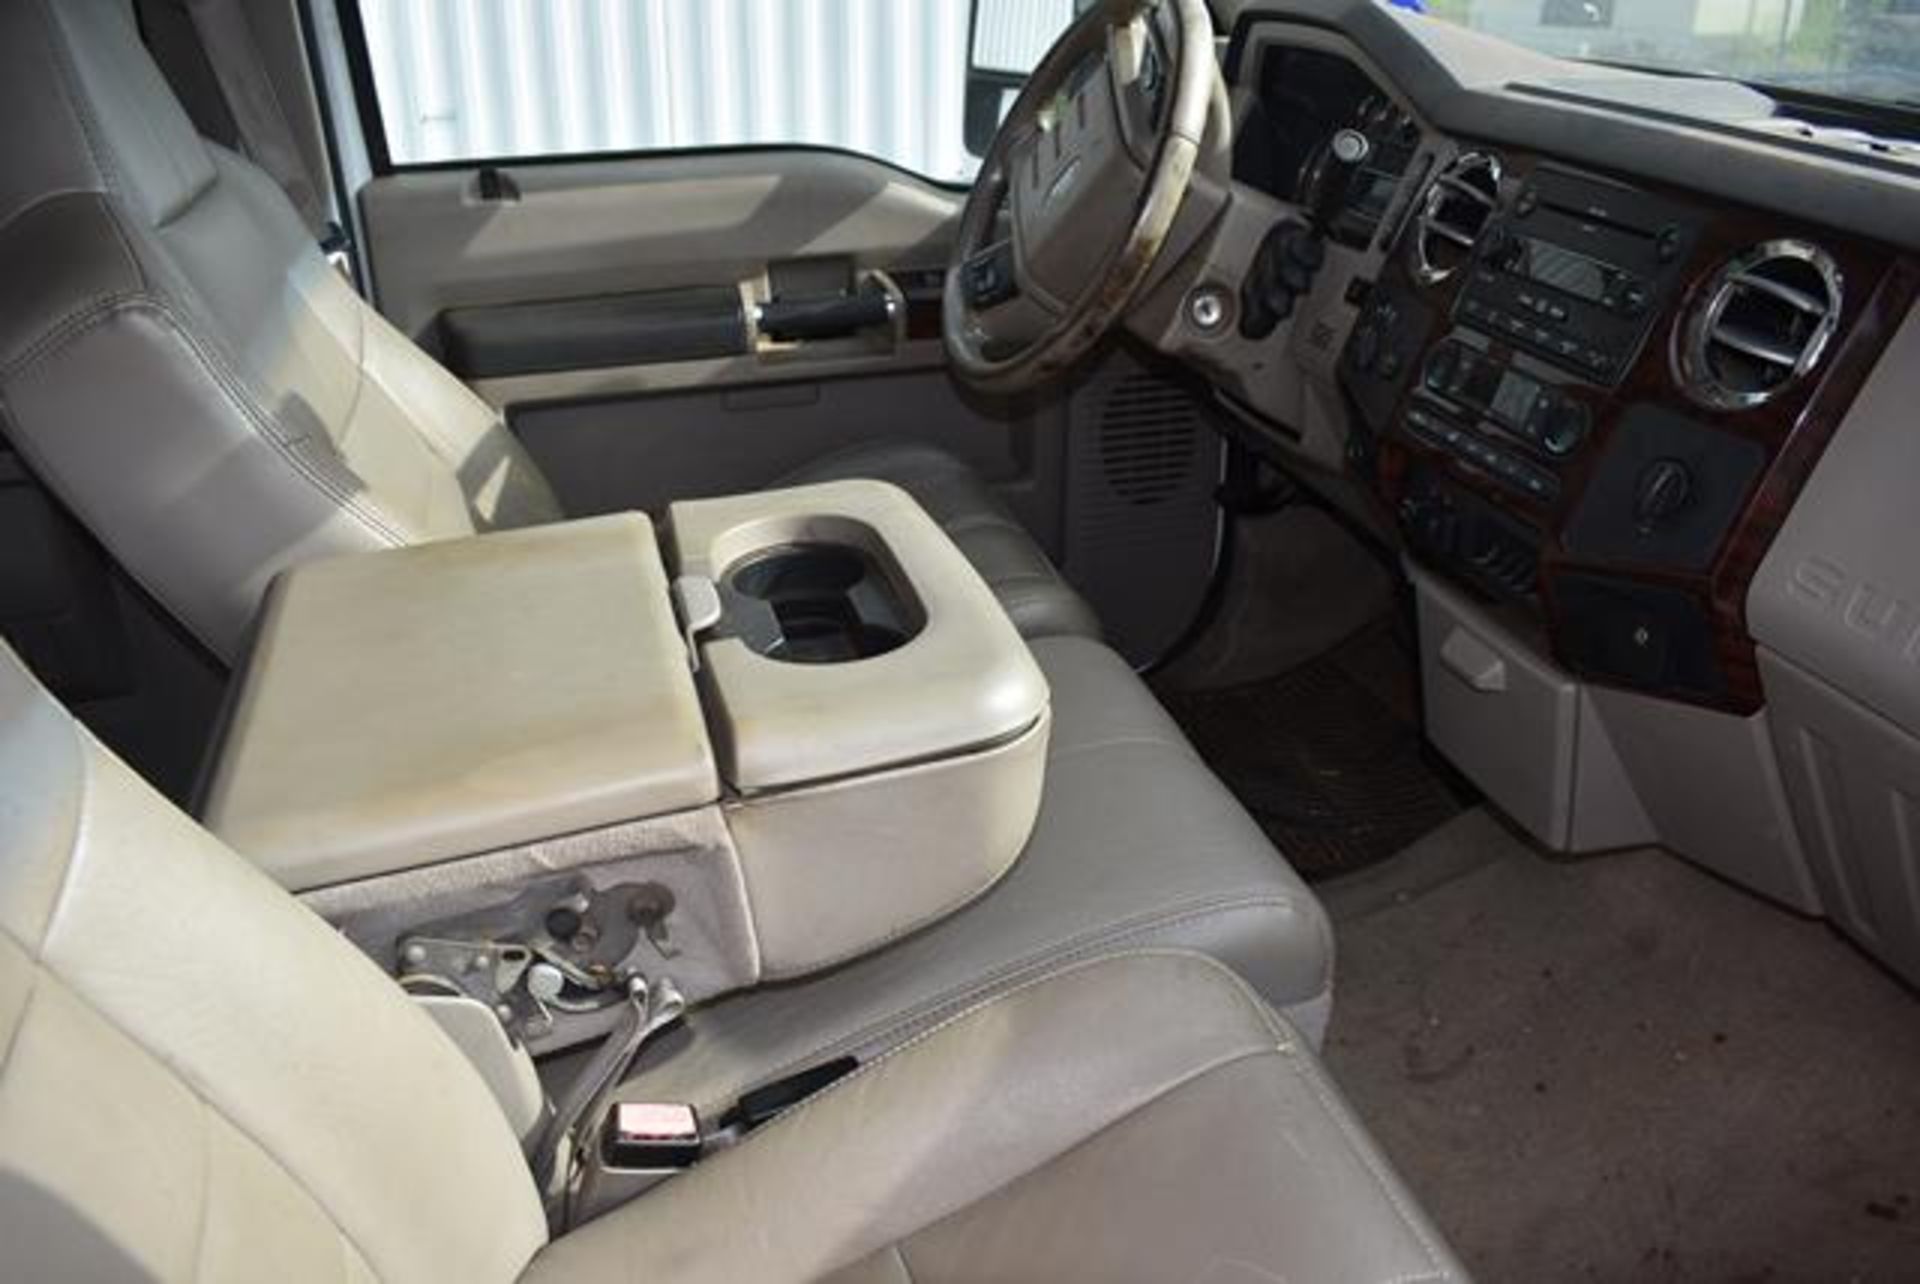 2008 Ford F-250 Lariat Super Duty Pickup Truck - White, 4 X 4, Off Duty Pickup Truck, VIN # - Image 4 of 4